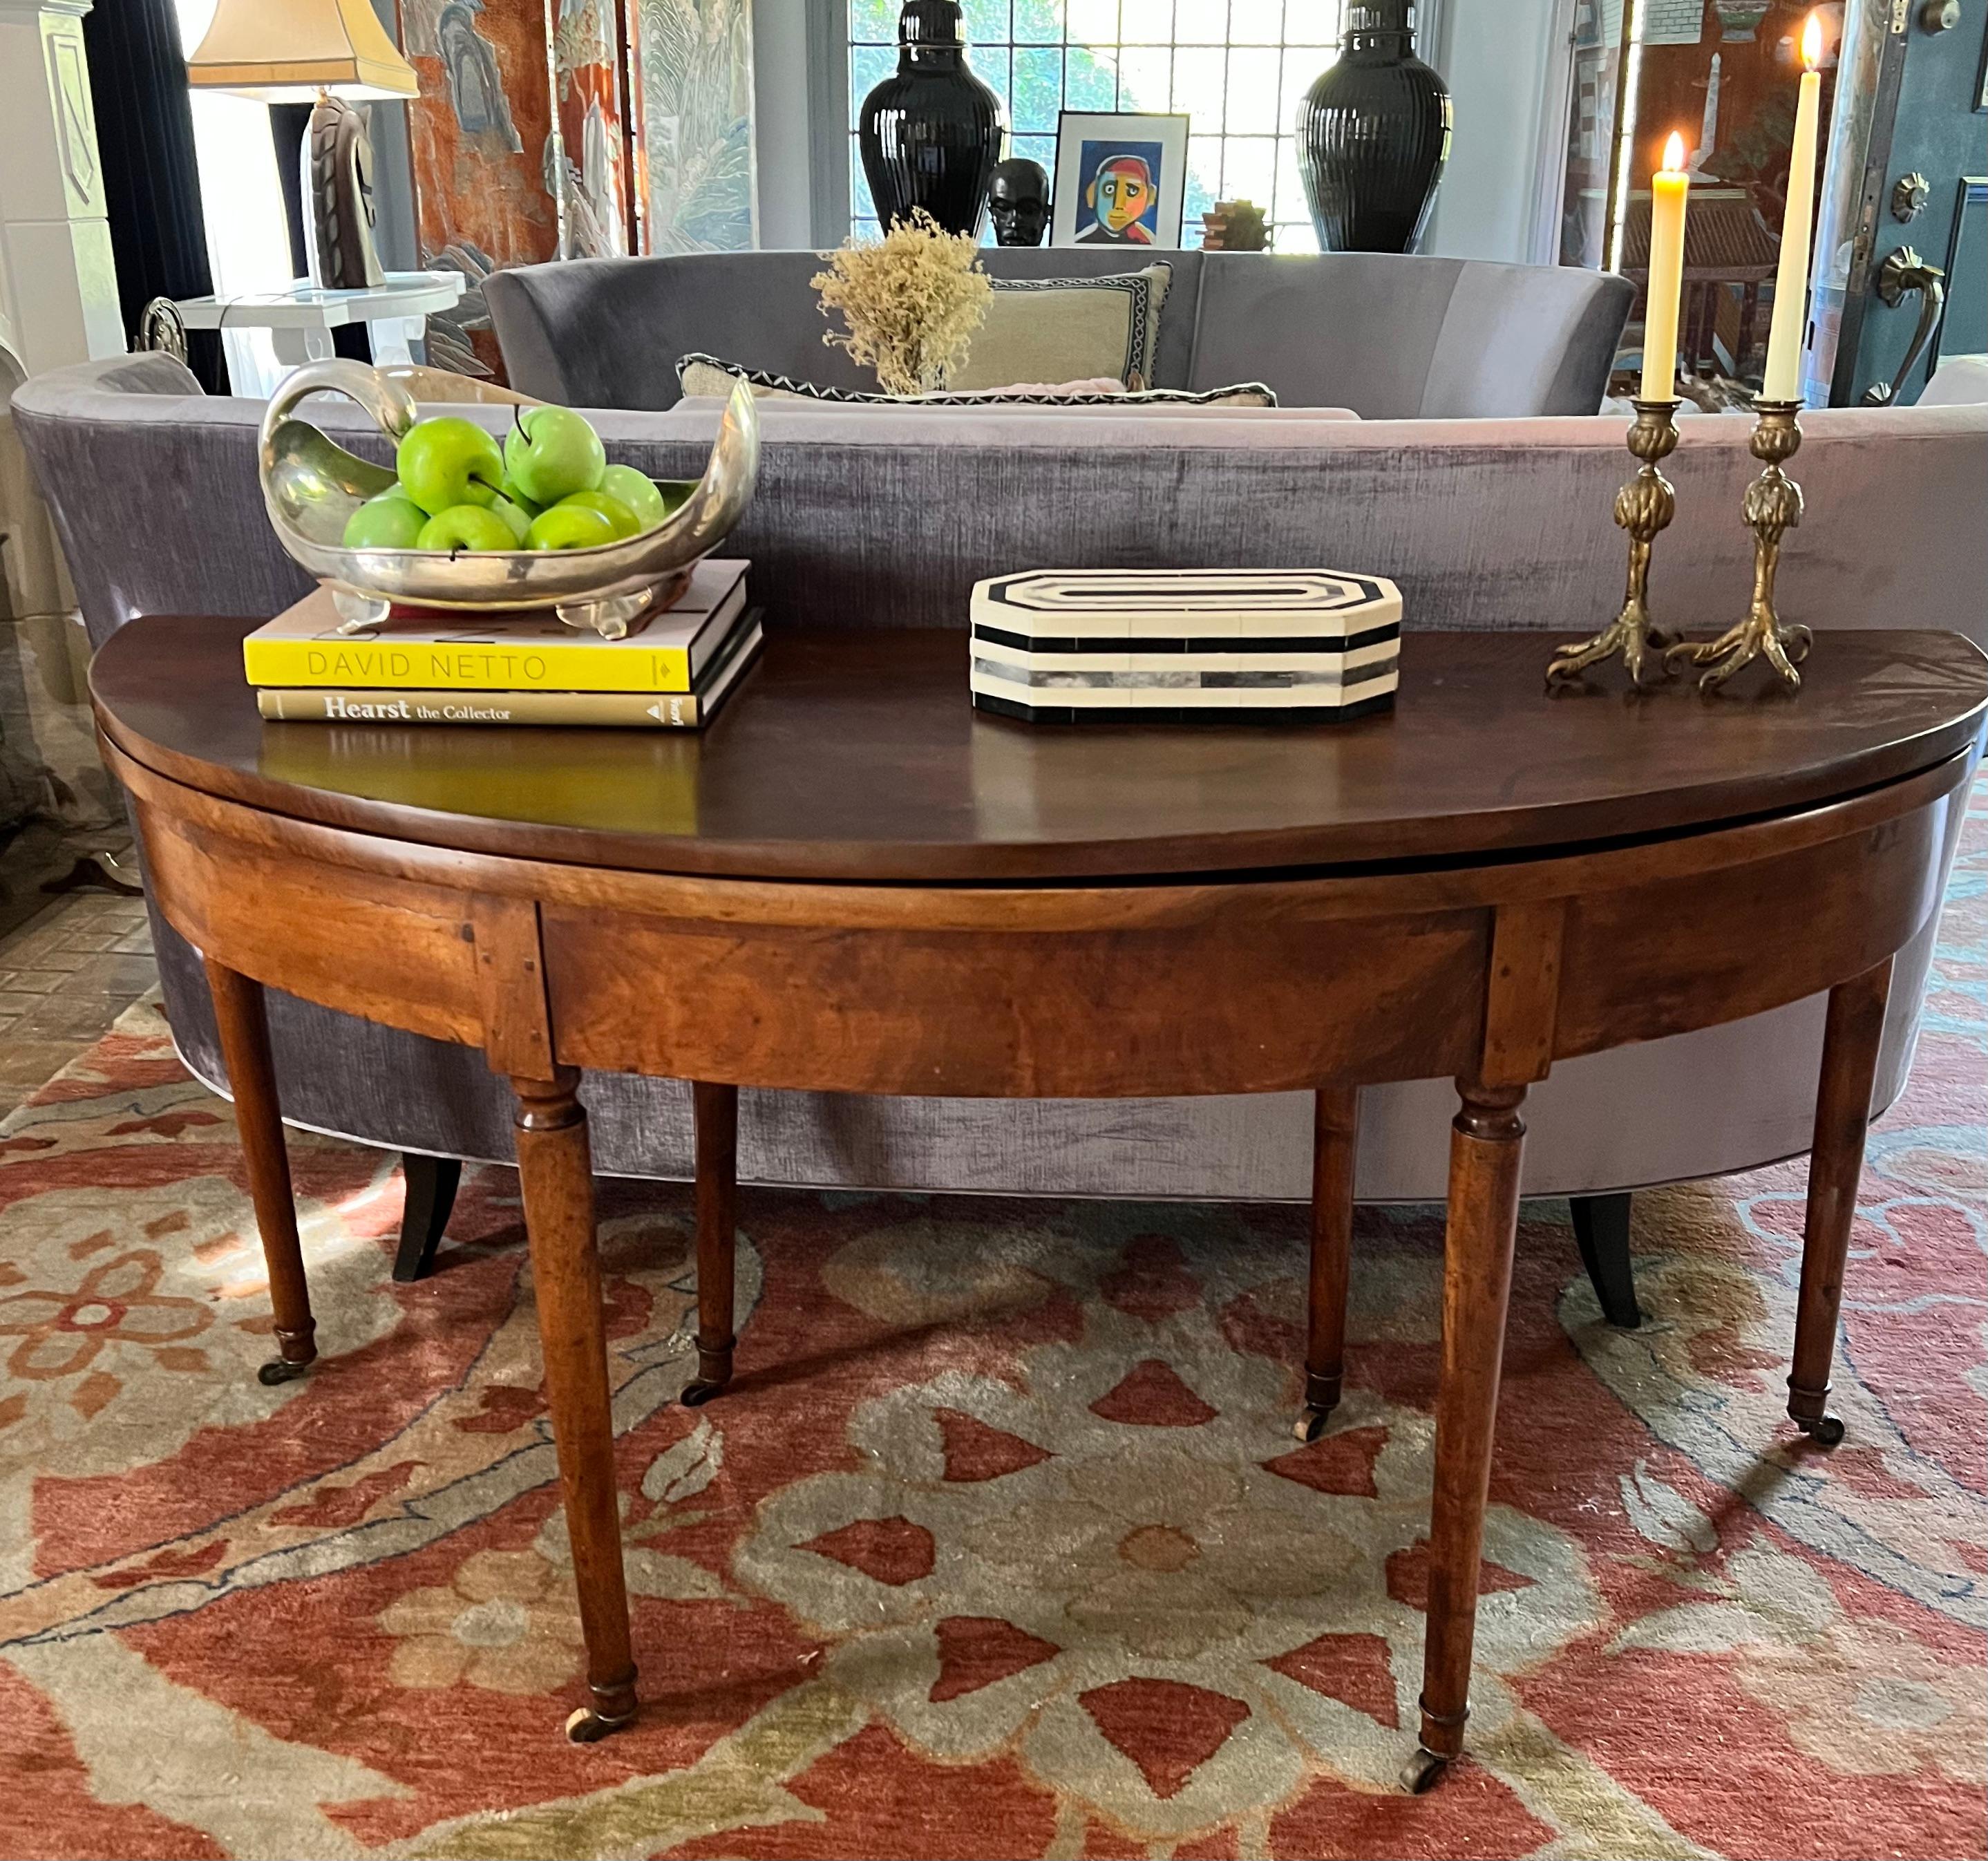 A stunning Early 19th Century Fruitwood Fold over dining or console table.  The piece retains all of its original hardware, hinges, casters, etc. and has beautifully crafted joints and dovetails throughout.  

A convenient drawers pulls out to hold